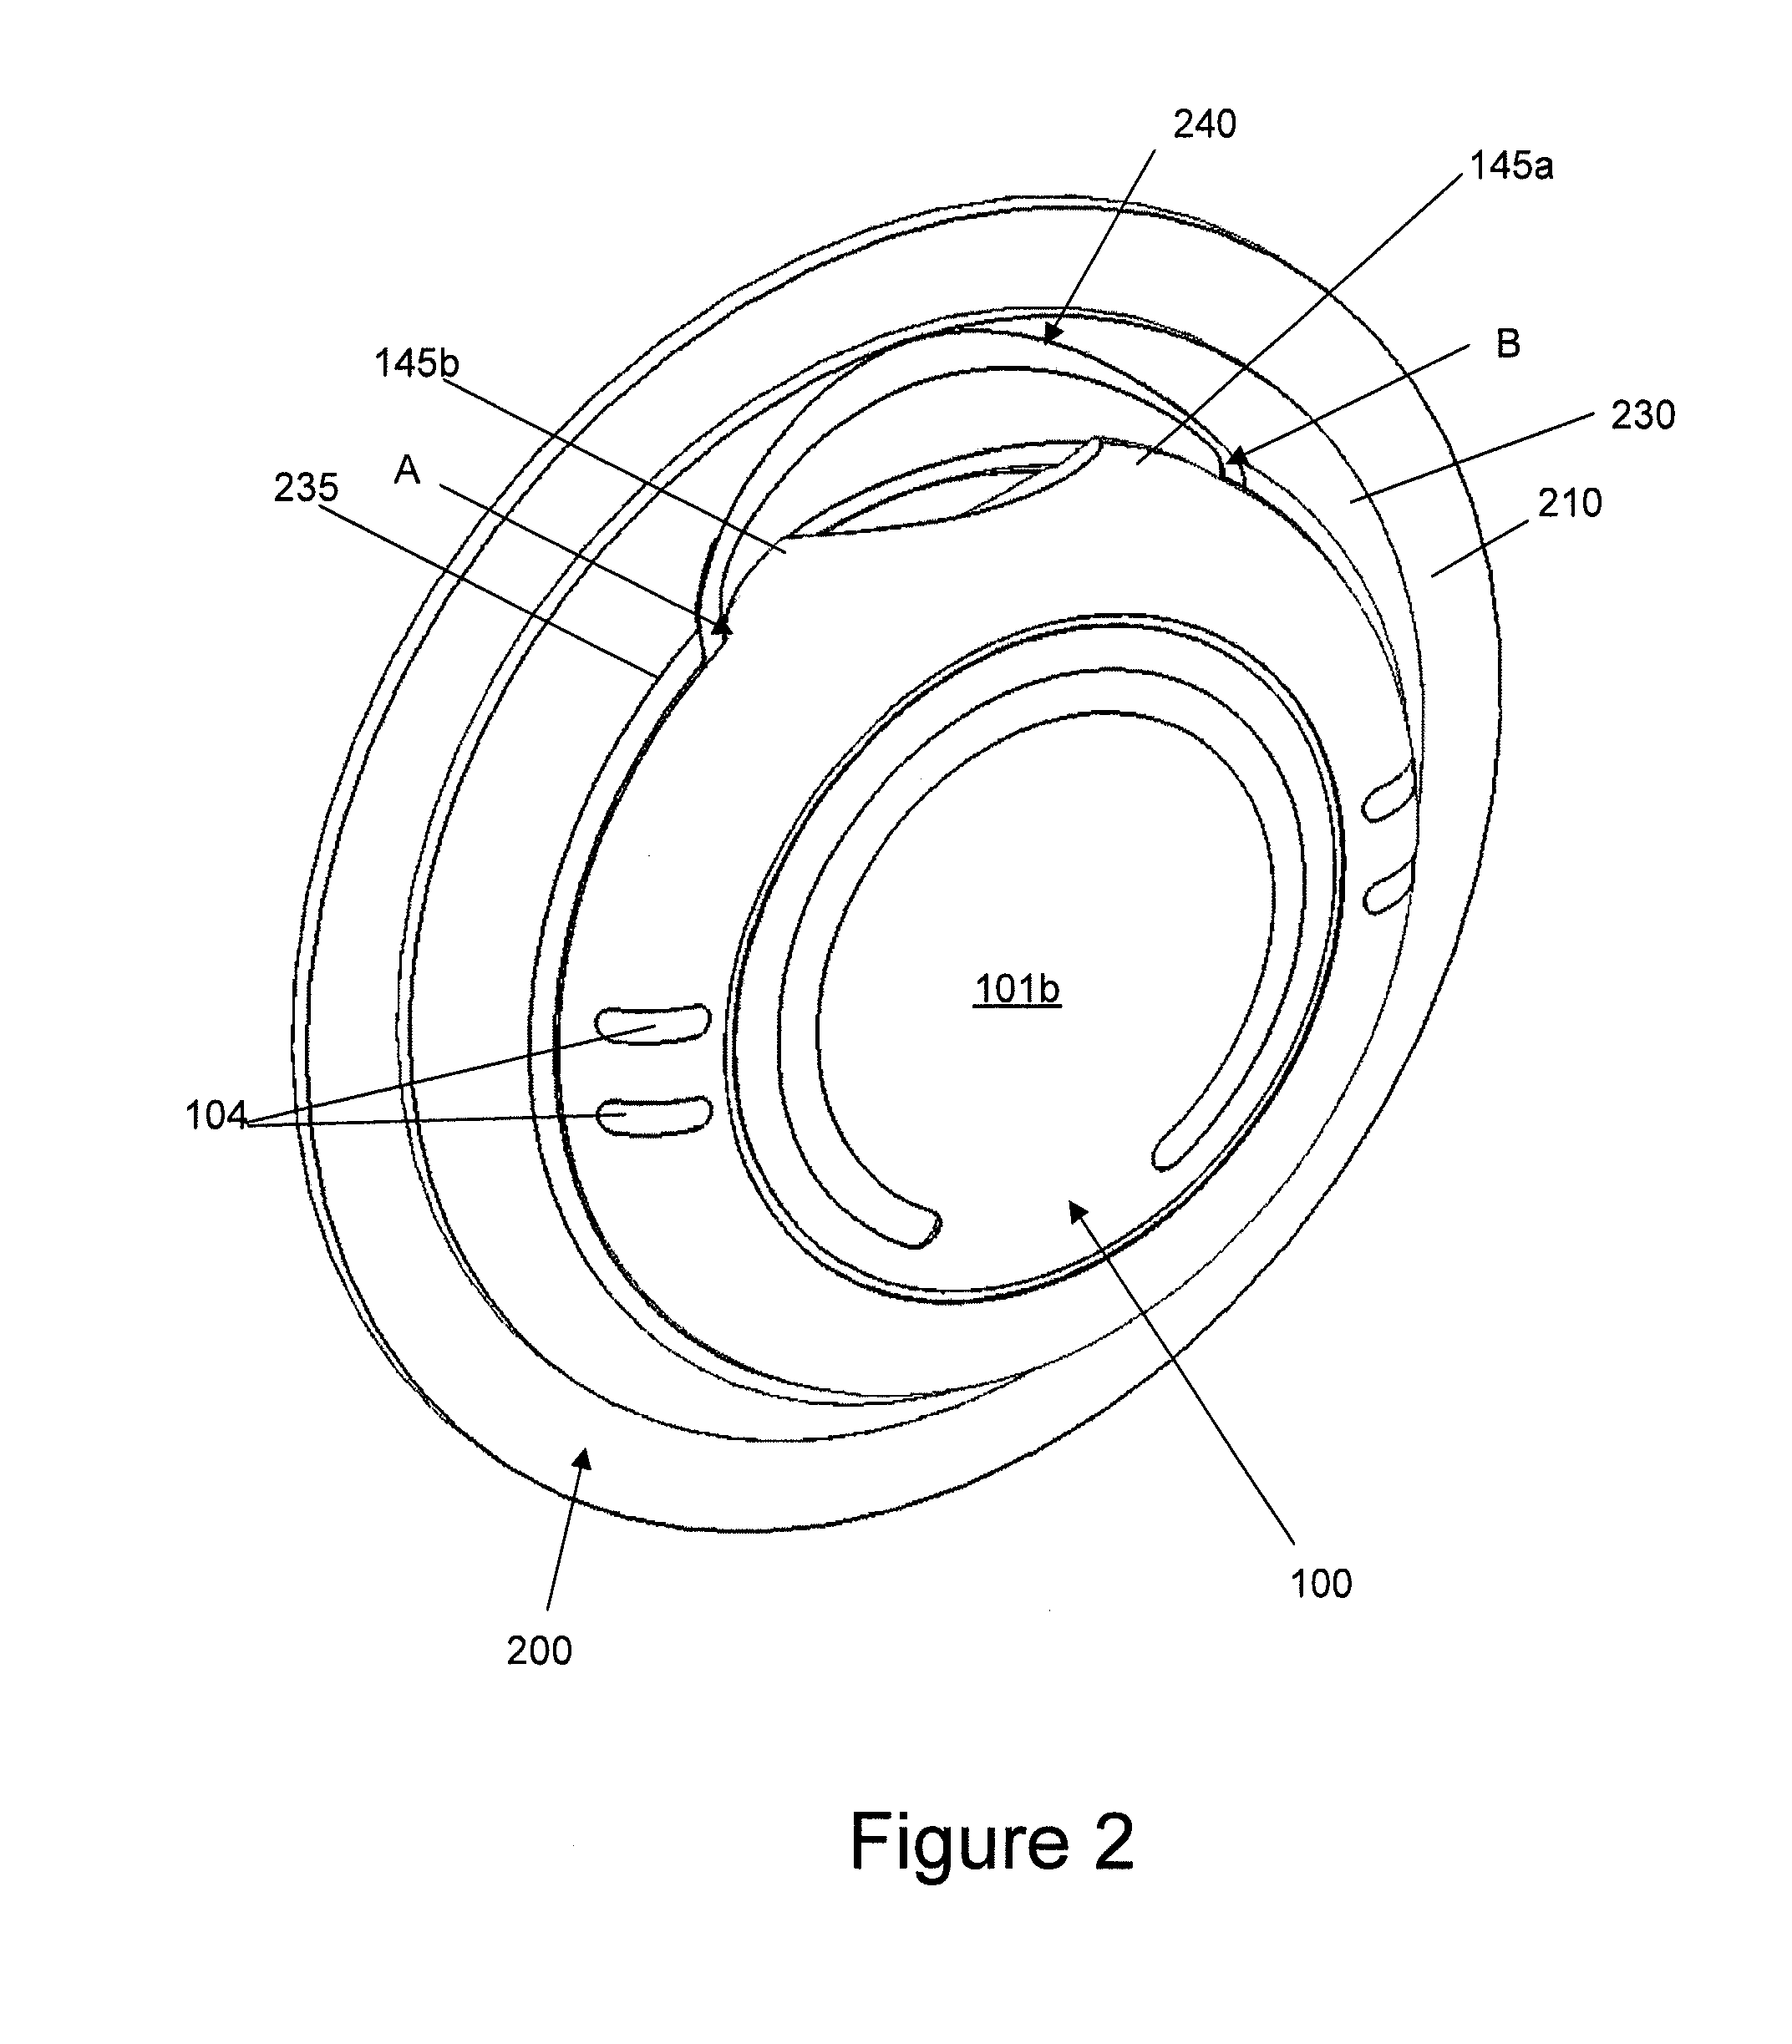 System method and device for monitoring physiological parameters of a person